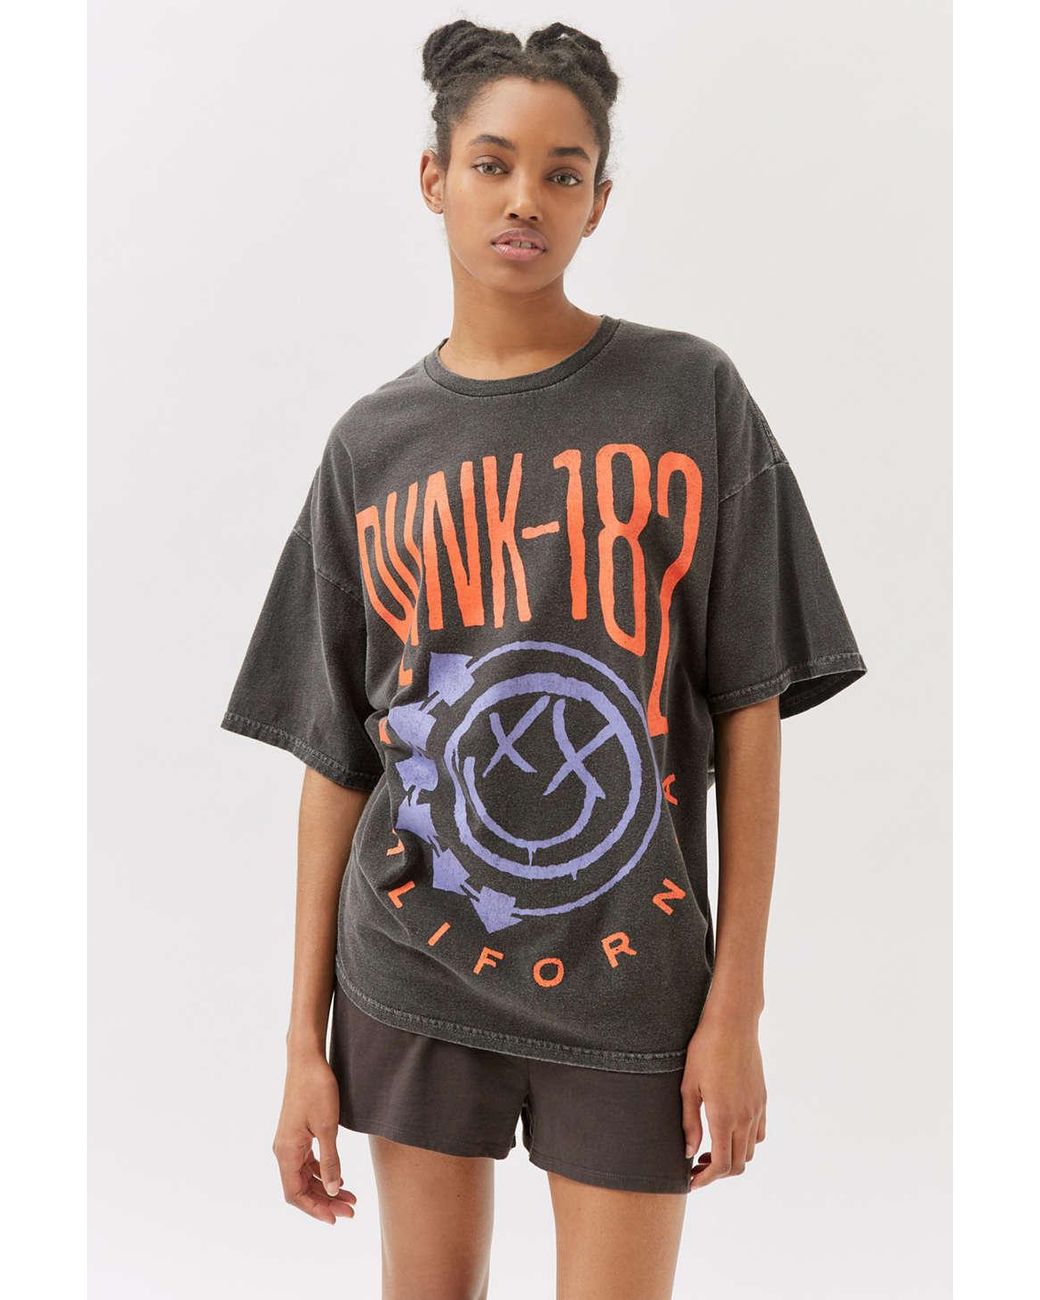 Nemlig personificering Absorbere Urban Outfitters Blink 182 T-shirt Dress in Black | Lyst